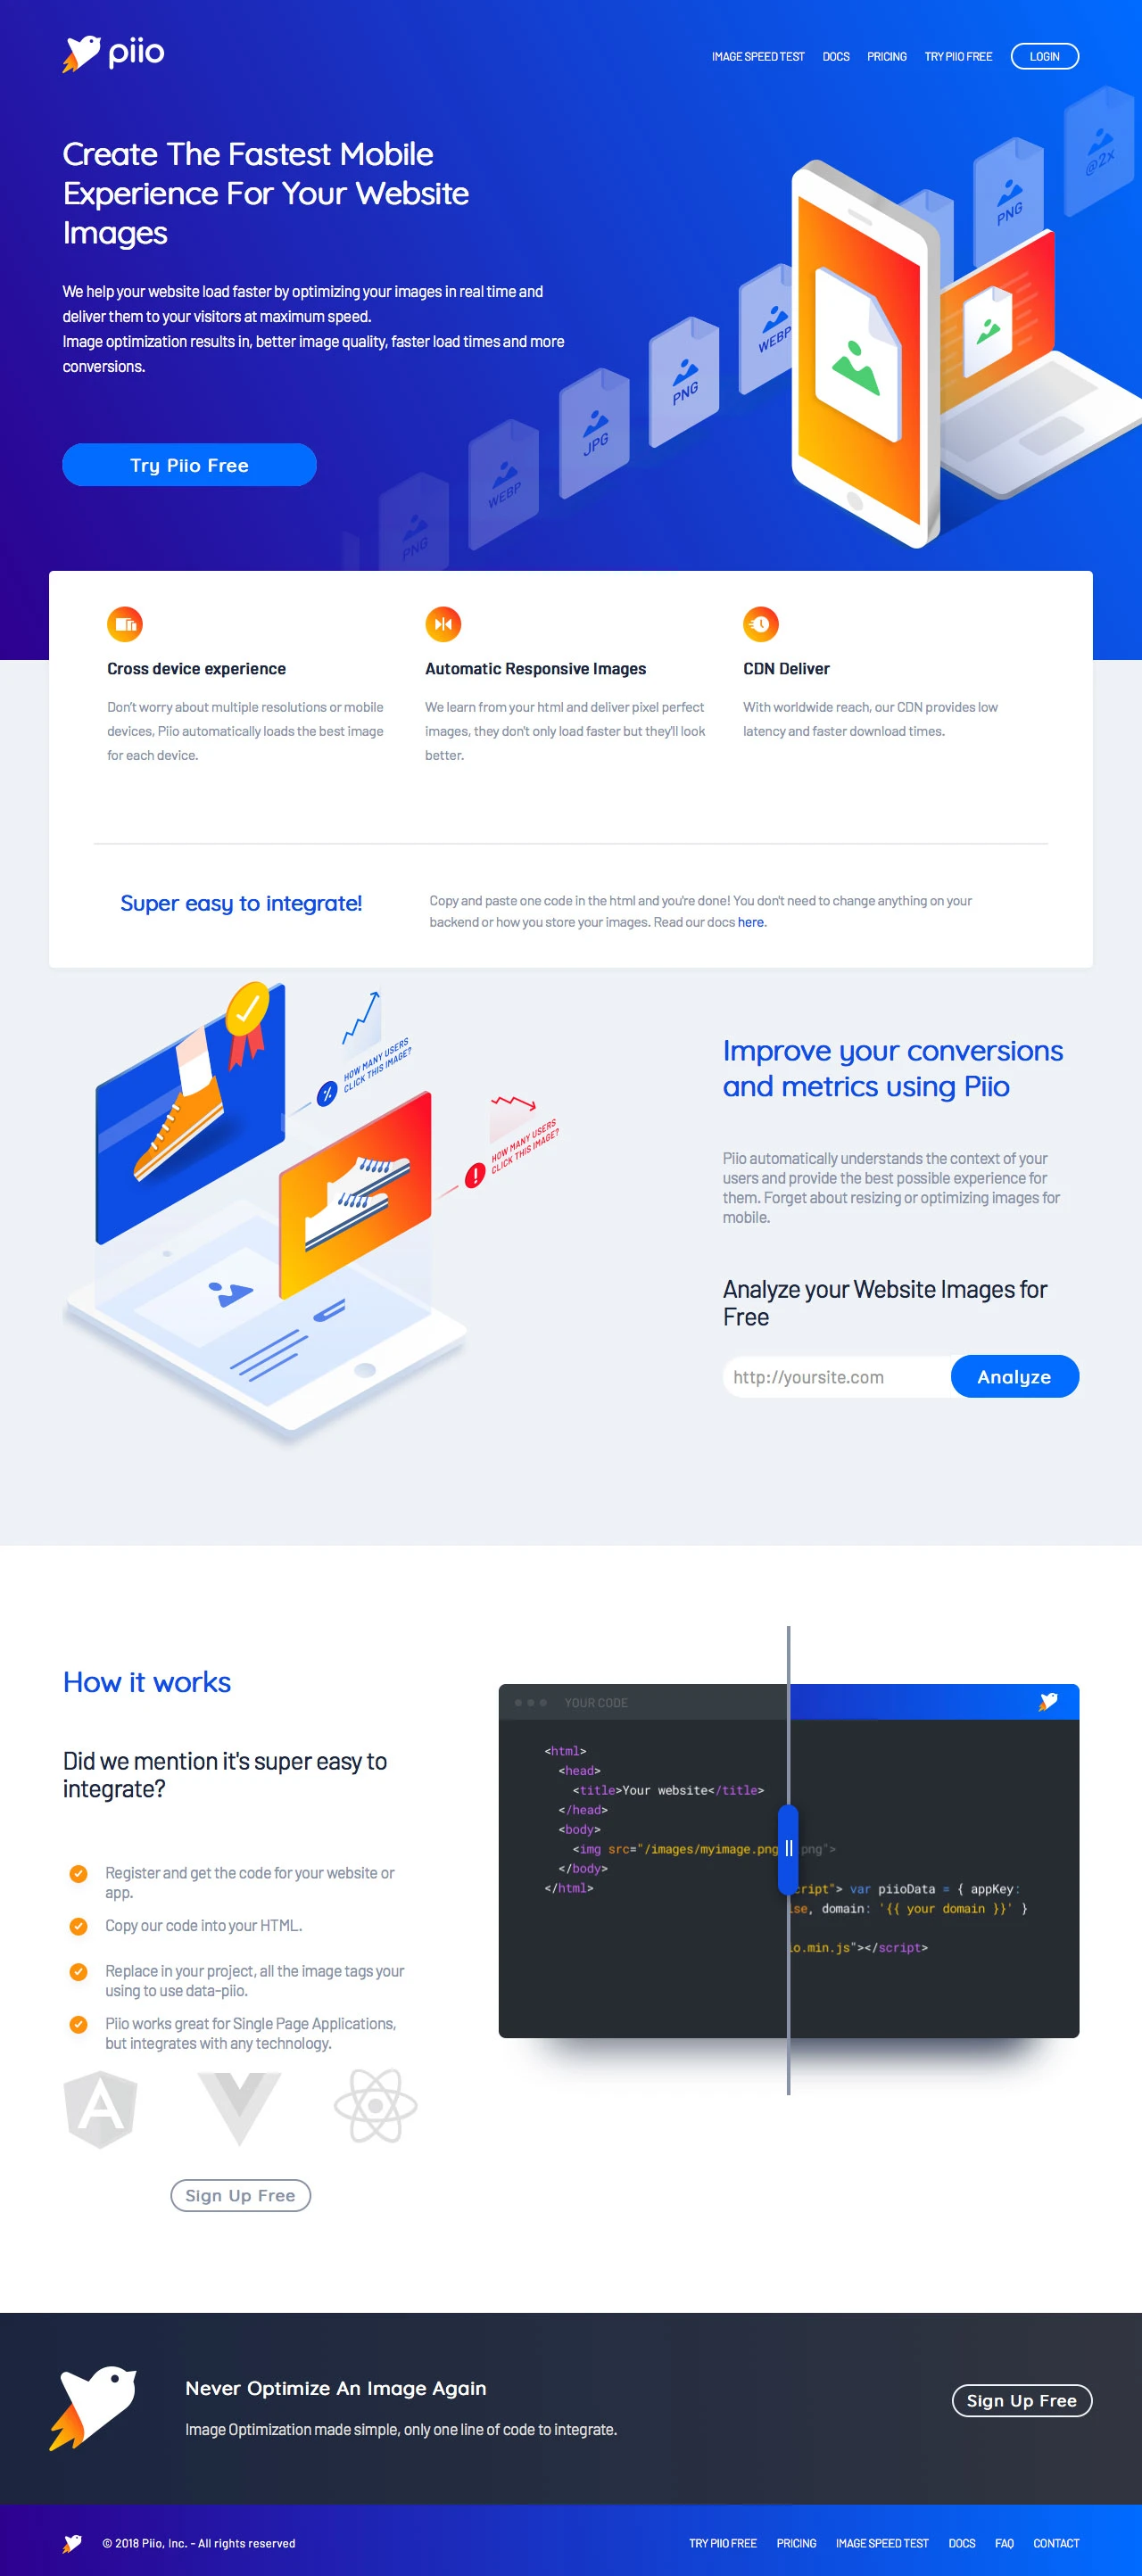 Piio Landing Page Example: We help your webpage load faster by optimizing your images in real time and deliver them to your visitors at maximum speed.